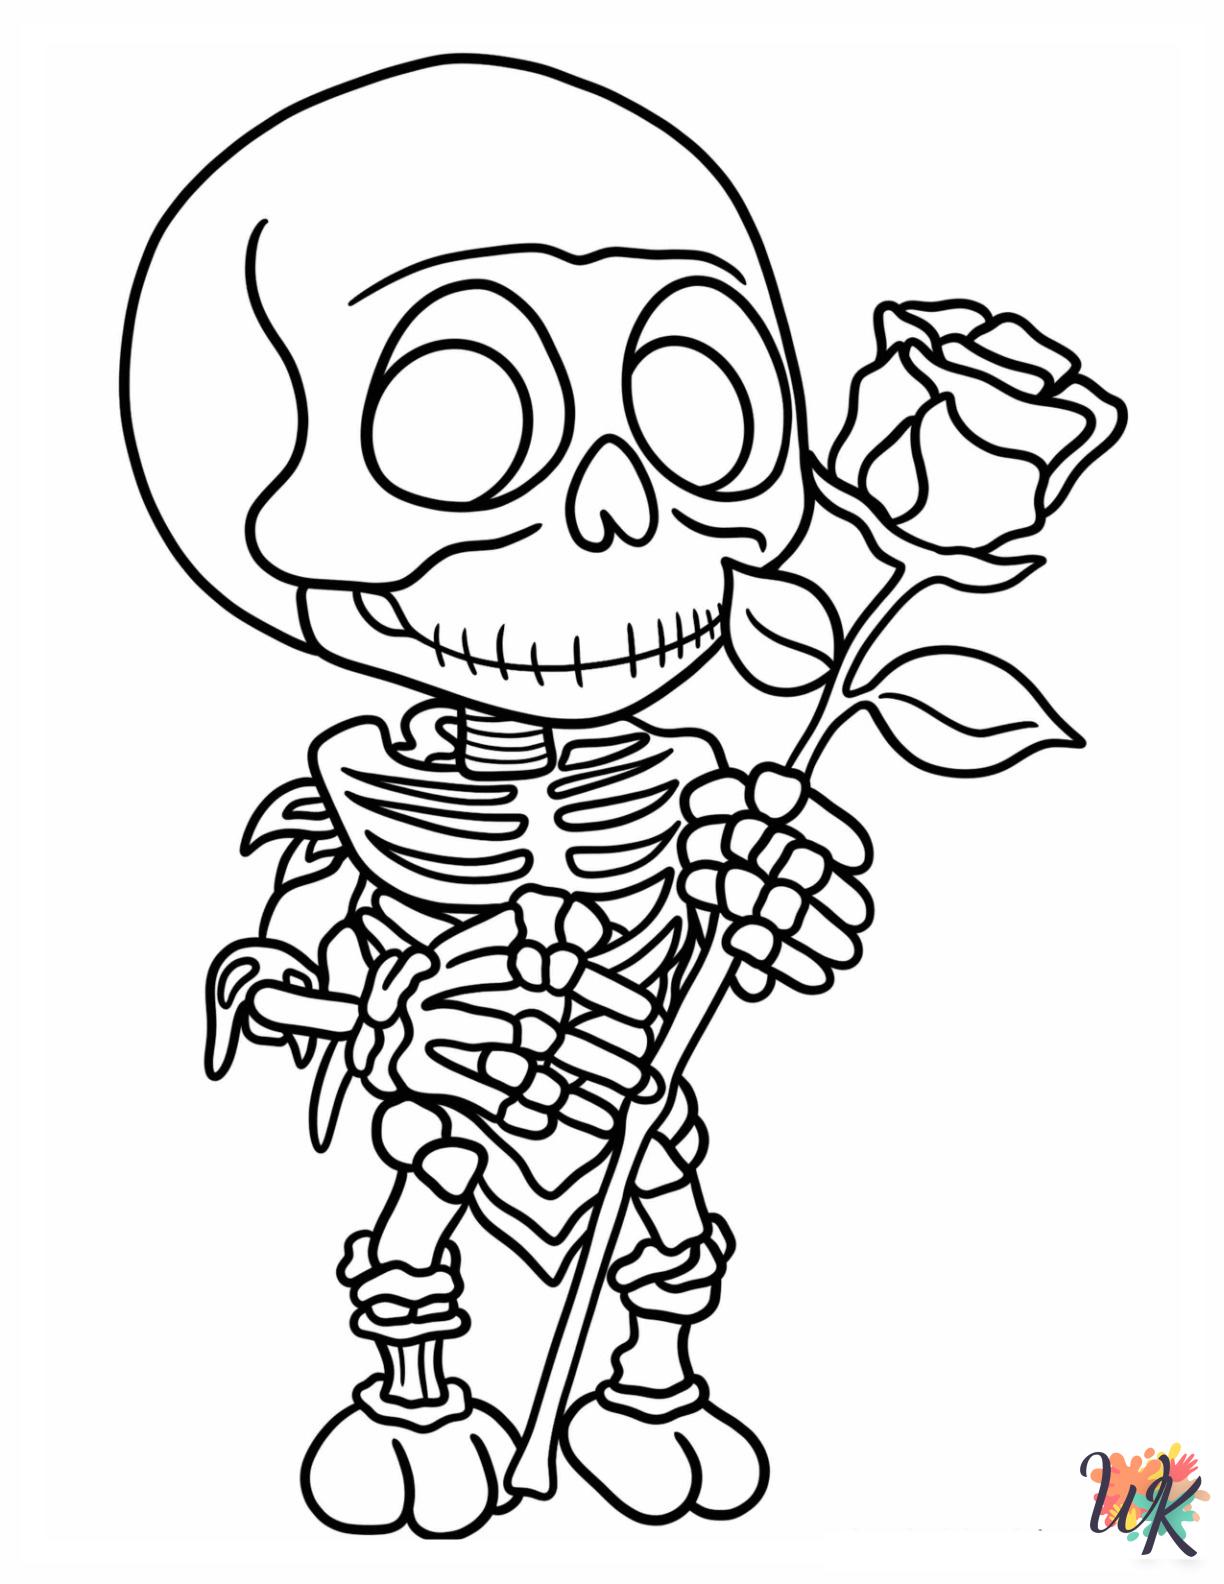 Skeleton coloring pages grinch 1